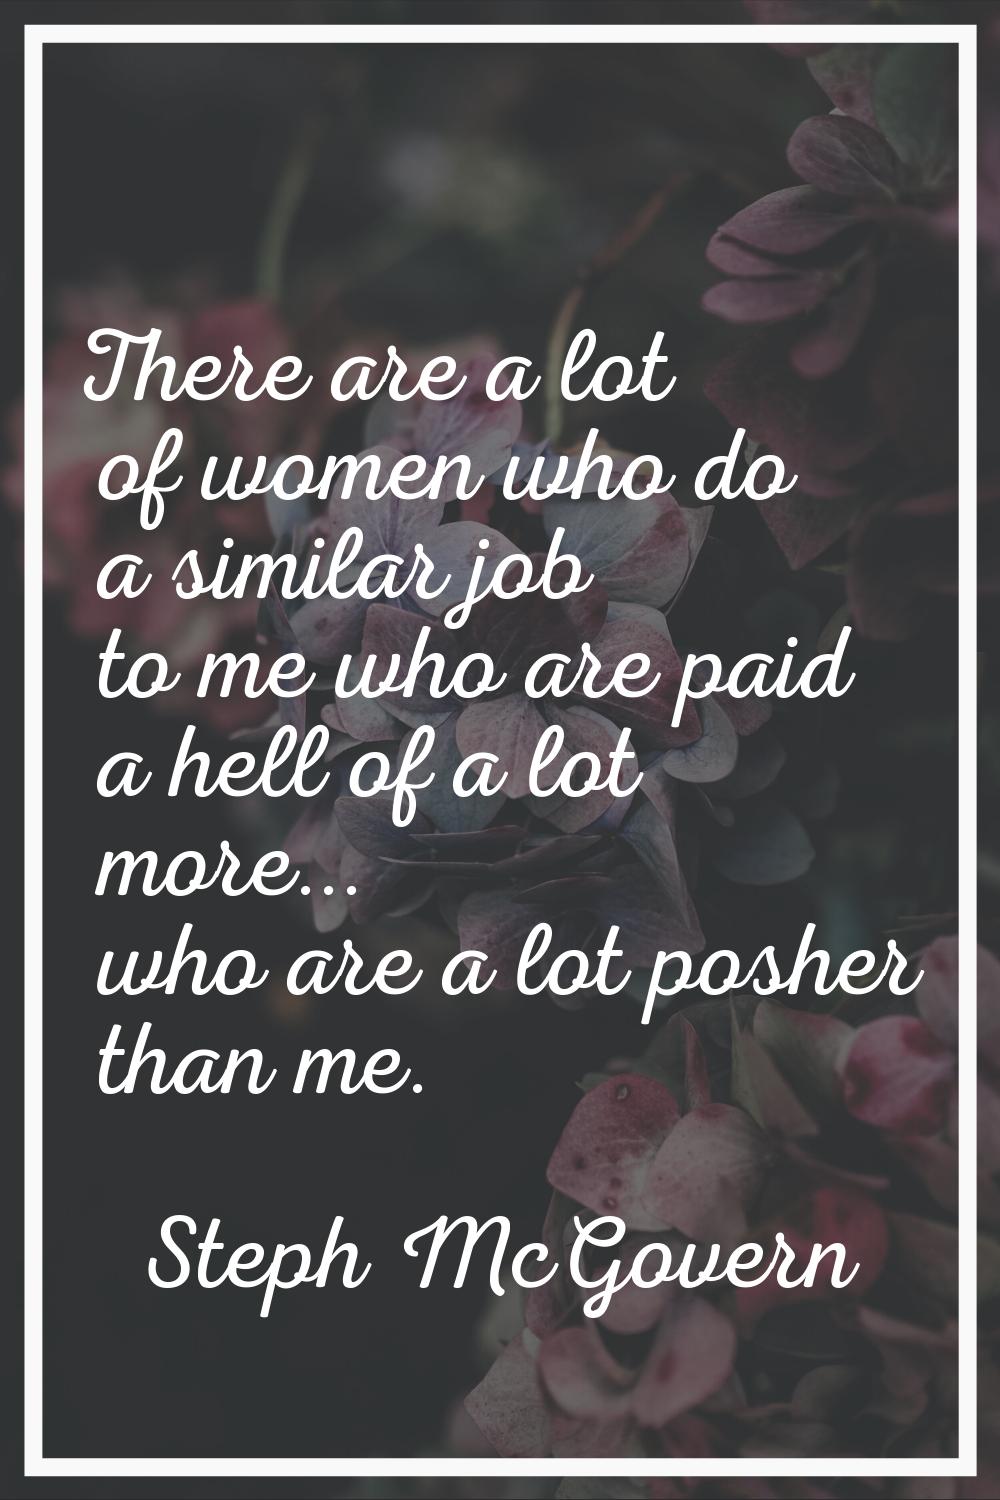 There are a lot of women who do a similar job to me who are paid a hell of a lot more... who are a 